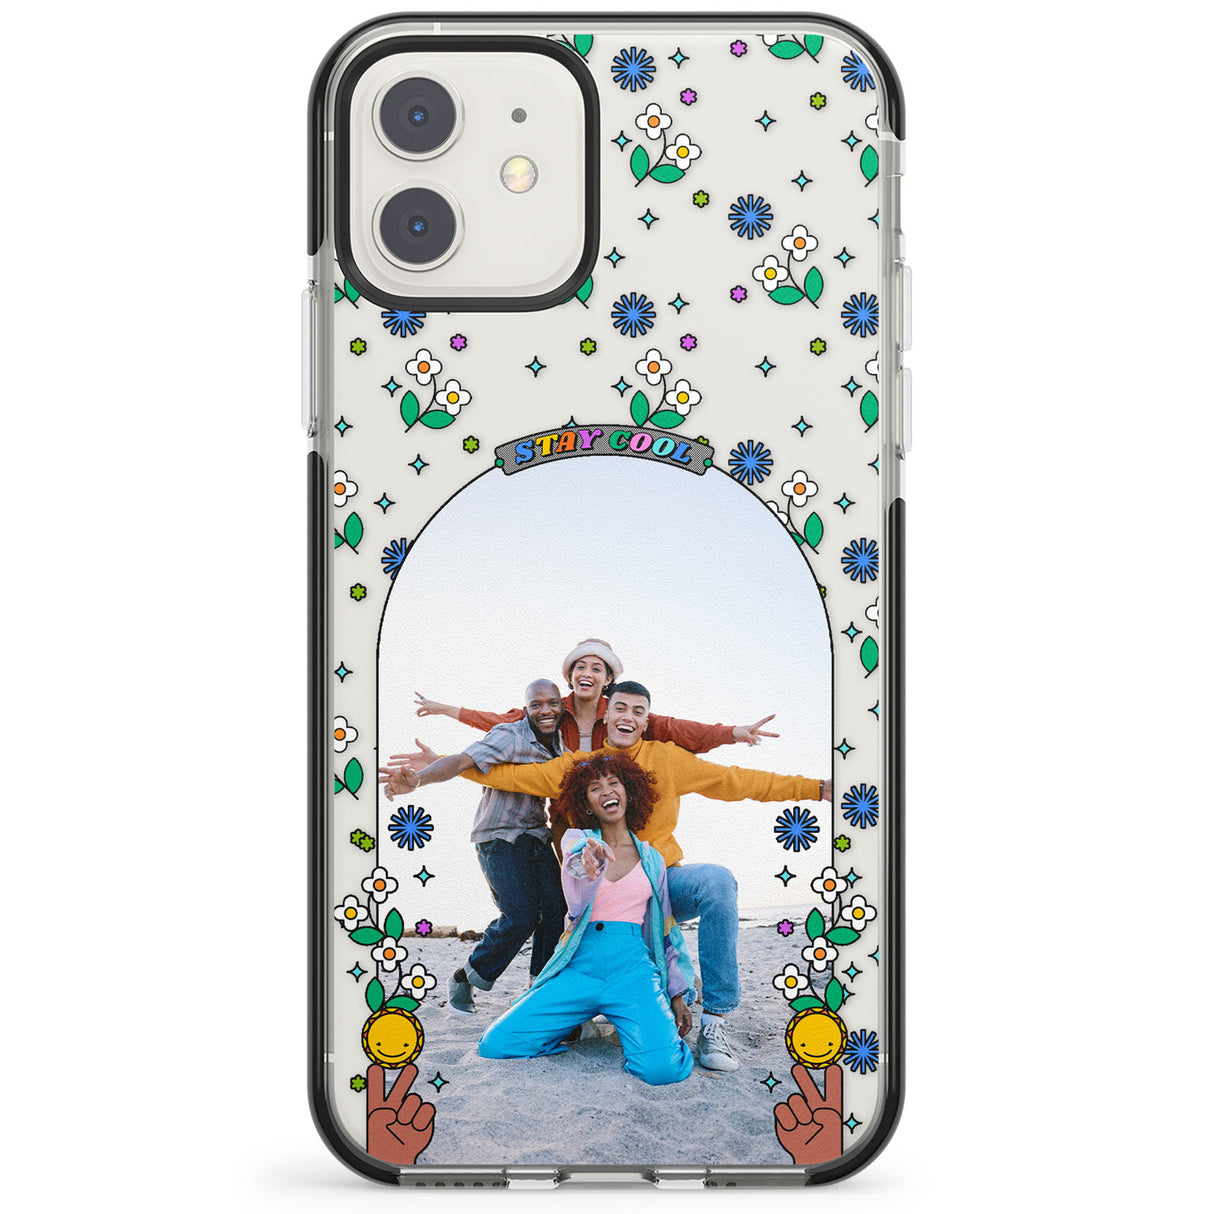 Personalised Summer Photo Frame Impact Phone Case for iPhone 11, iphone 12